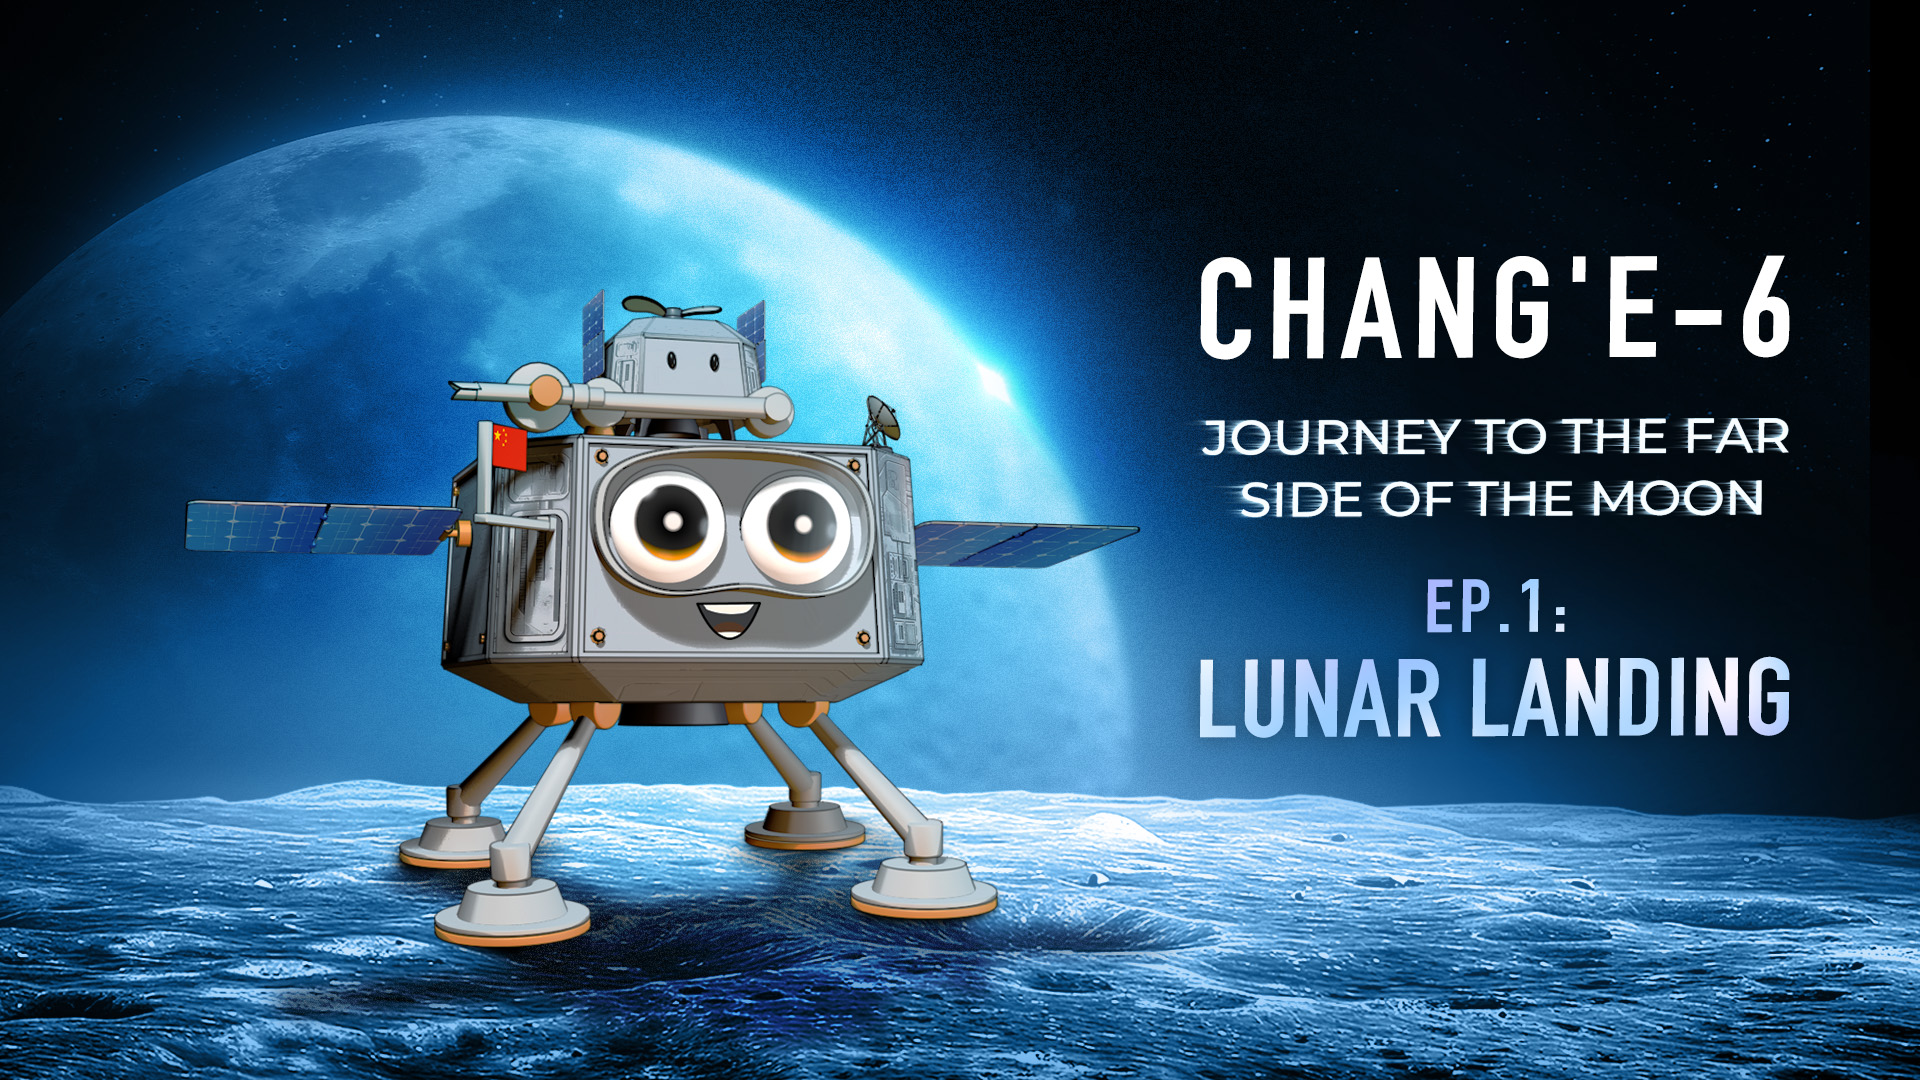 Chang'e-6: Journey to the far side of the moon, ep. 1 – Lunar landing